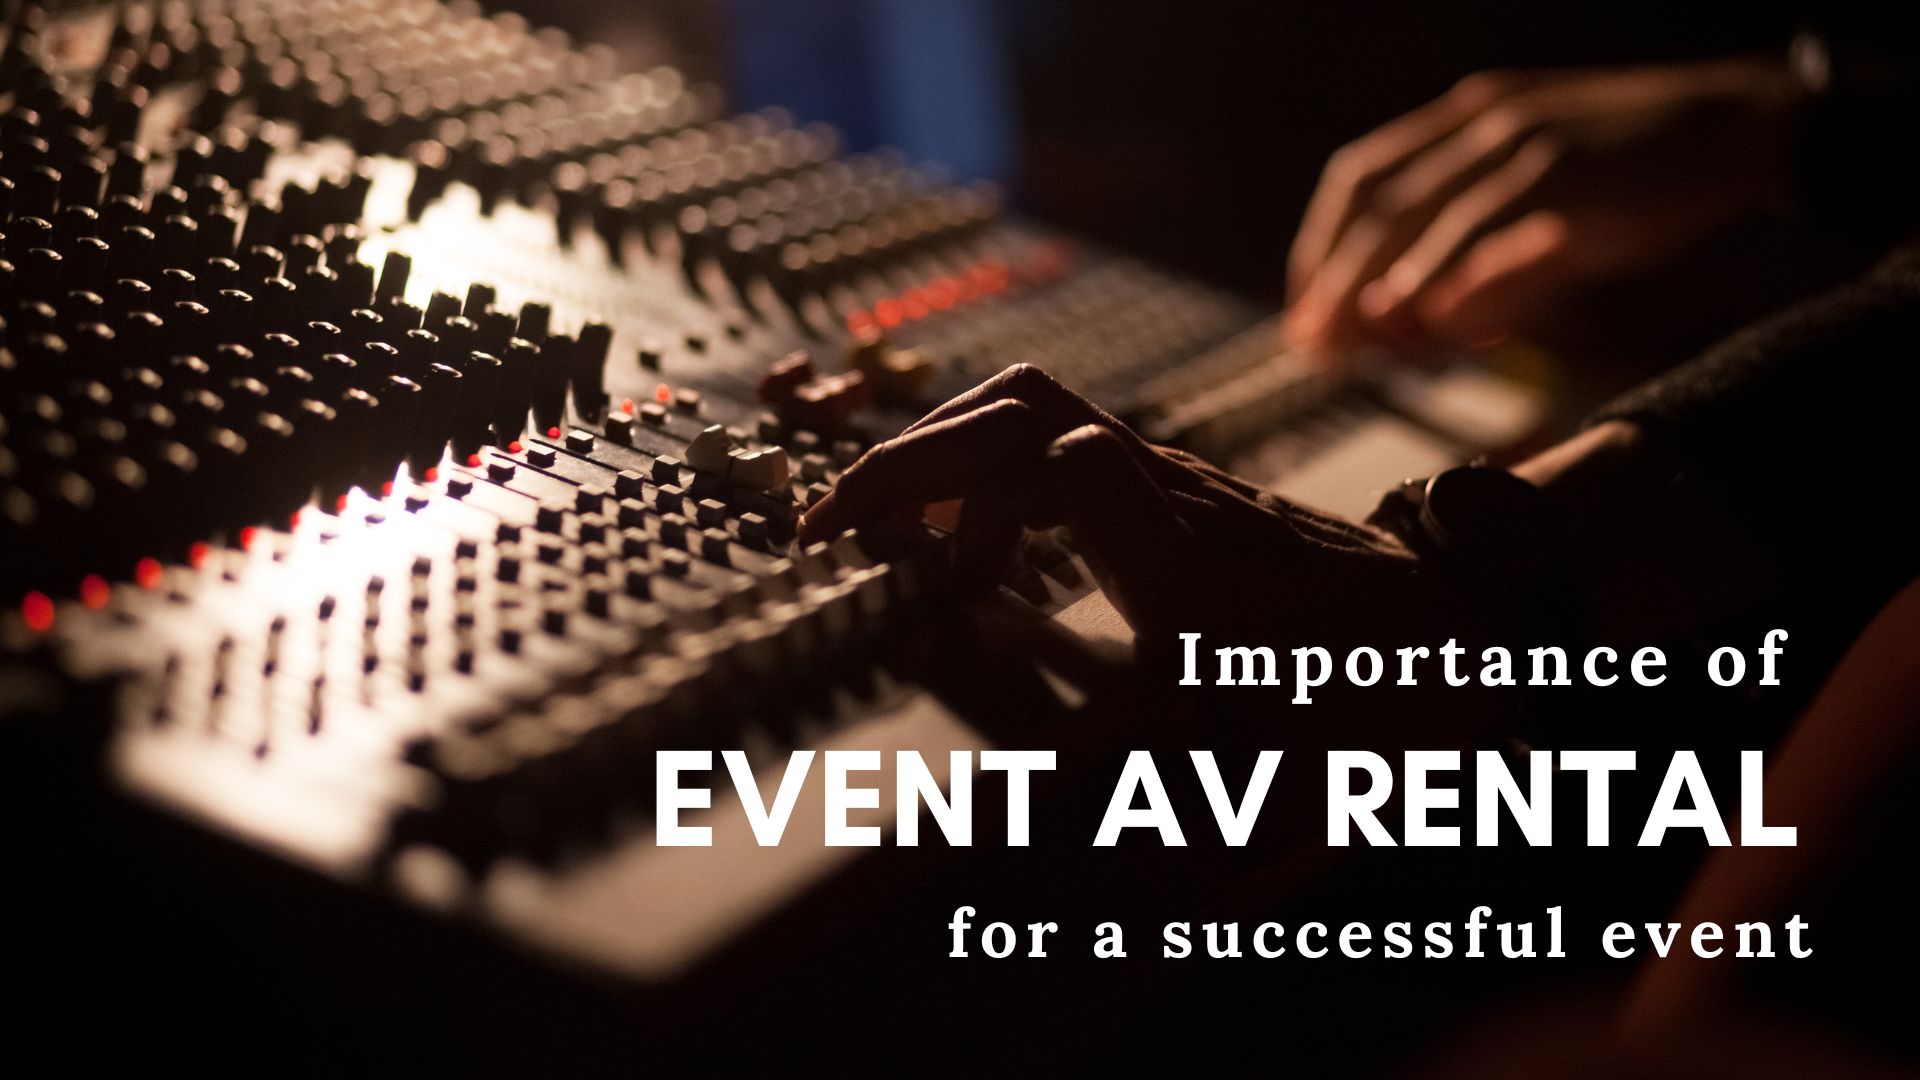 Importance of Event AV Rental for a successful event